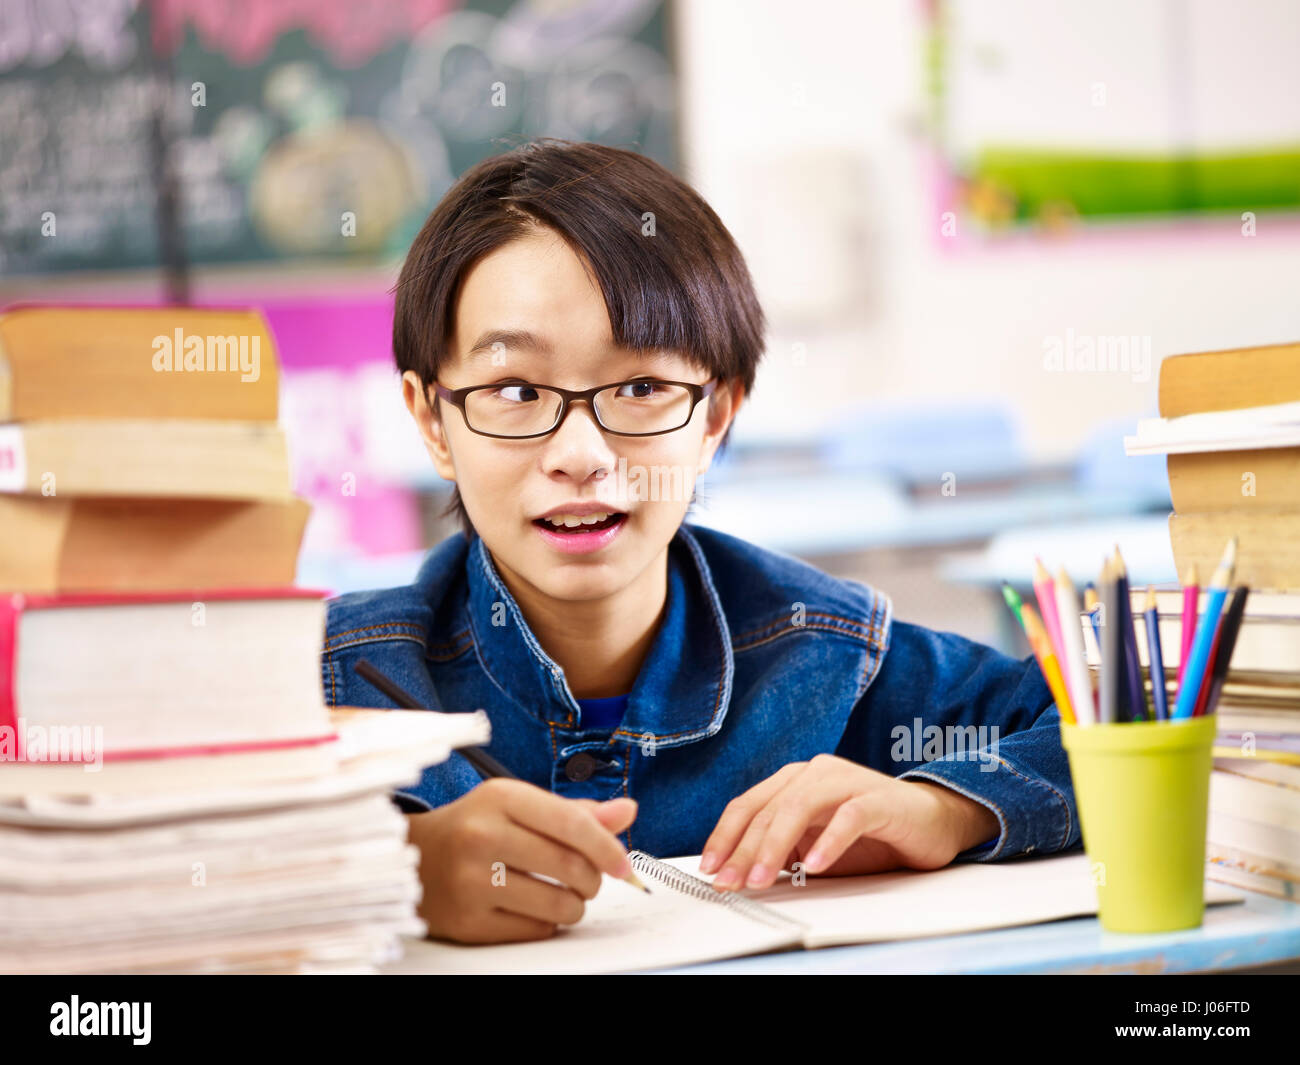 asian elementary schoolboy with funny and cute facial expression studying in classroom. Stock Photo